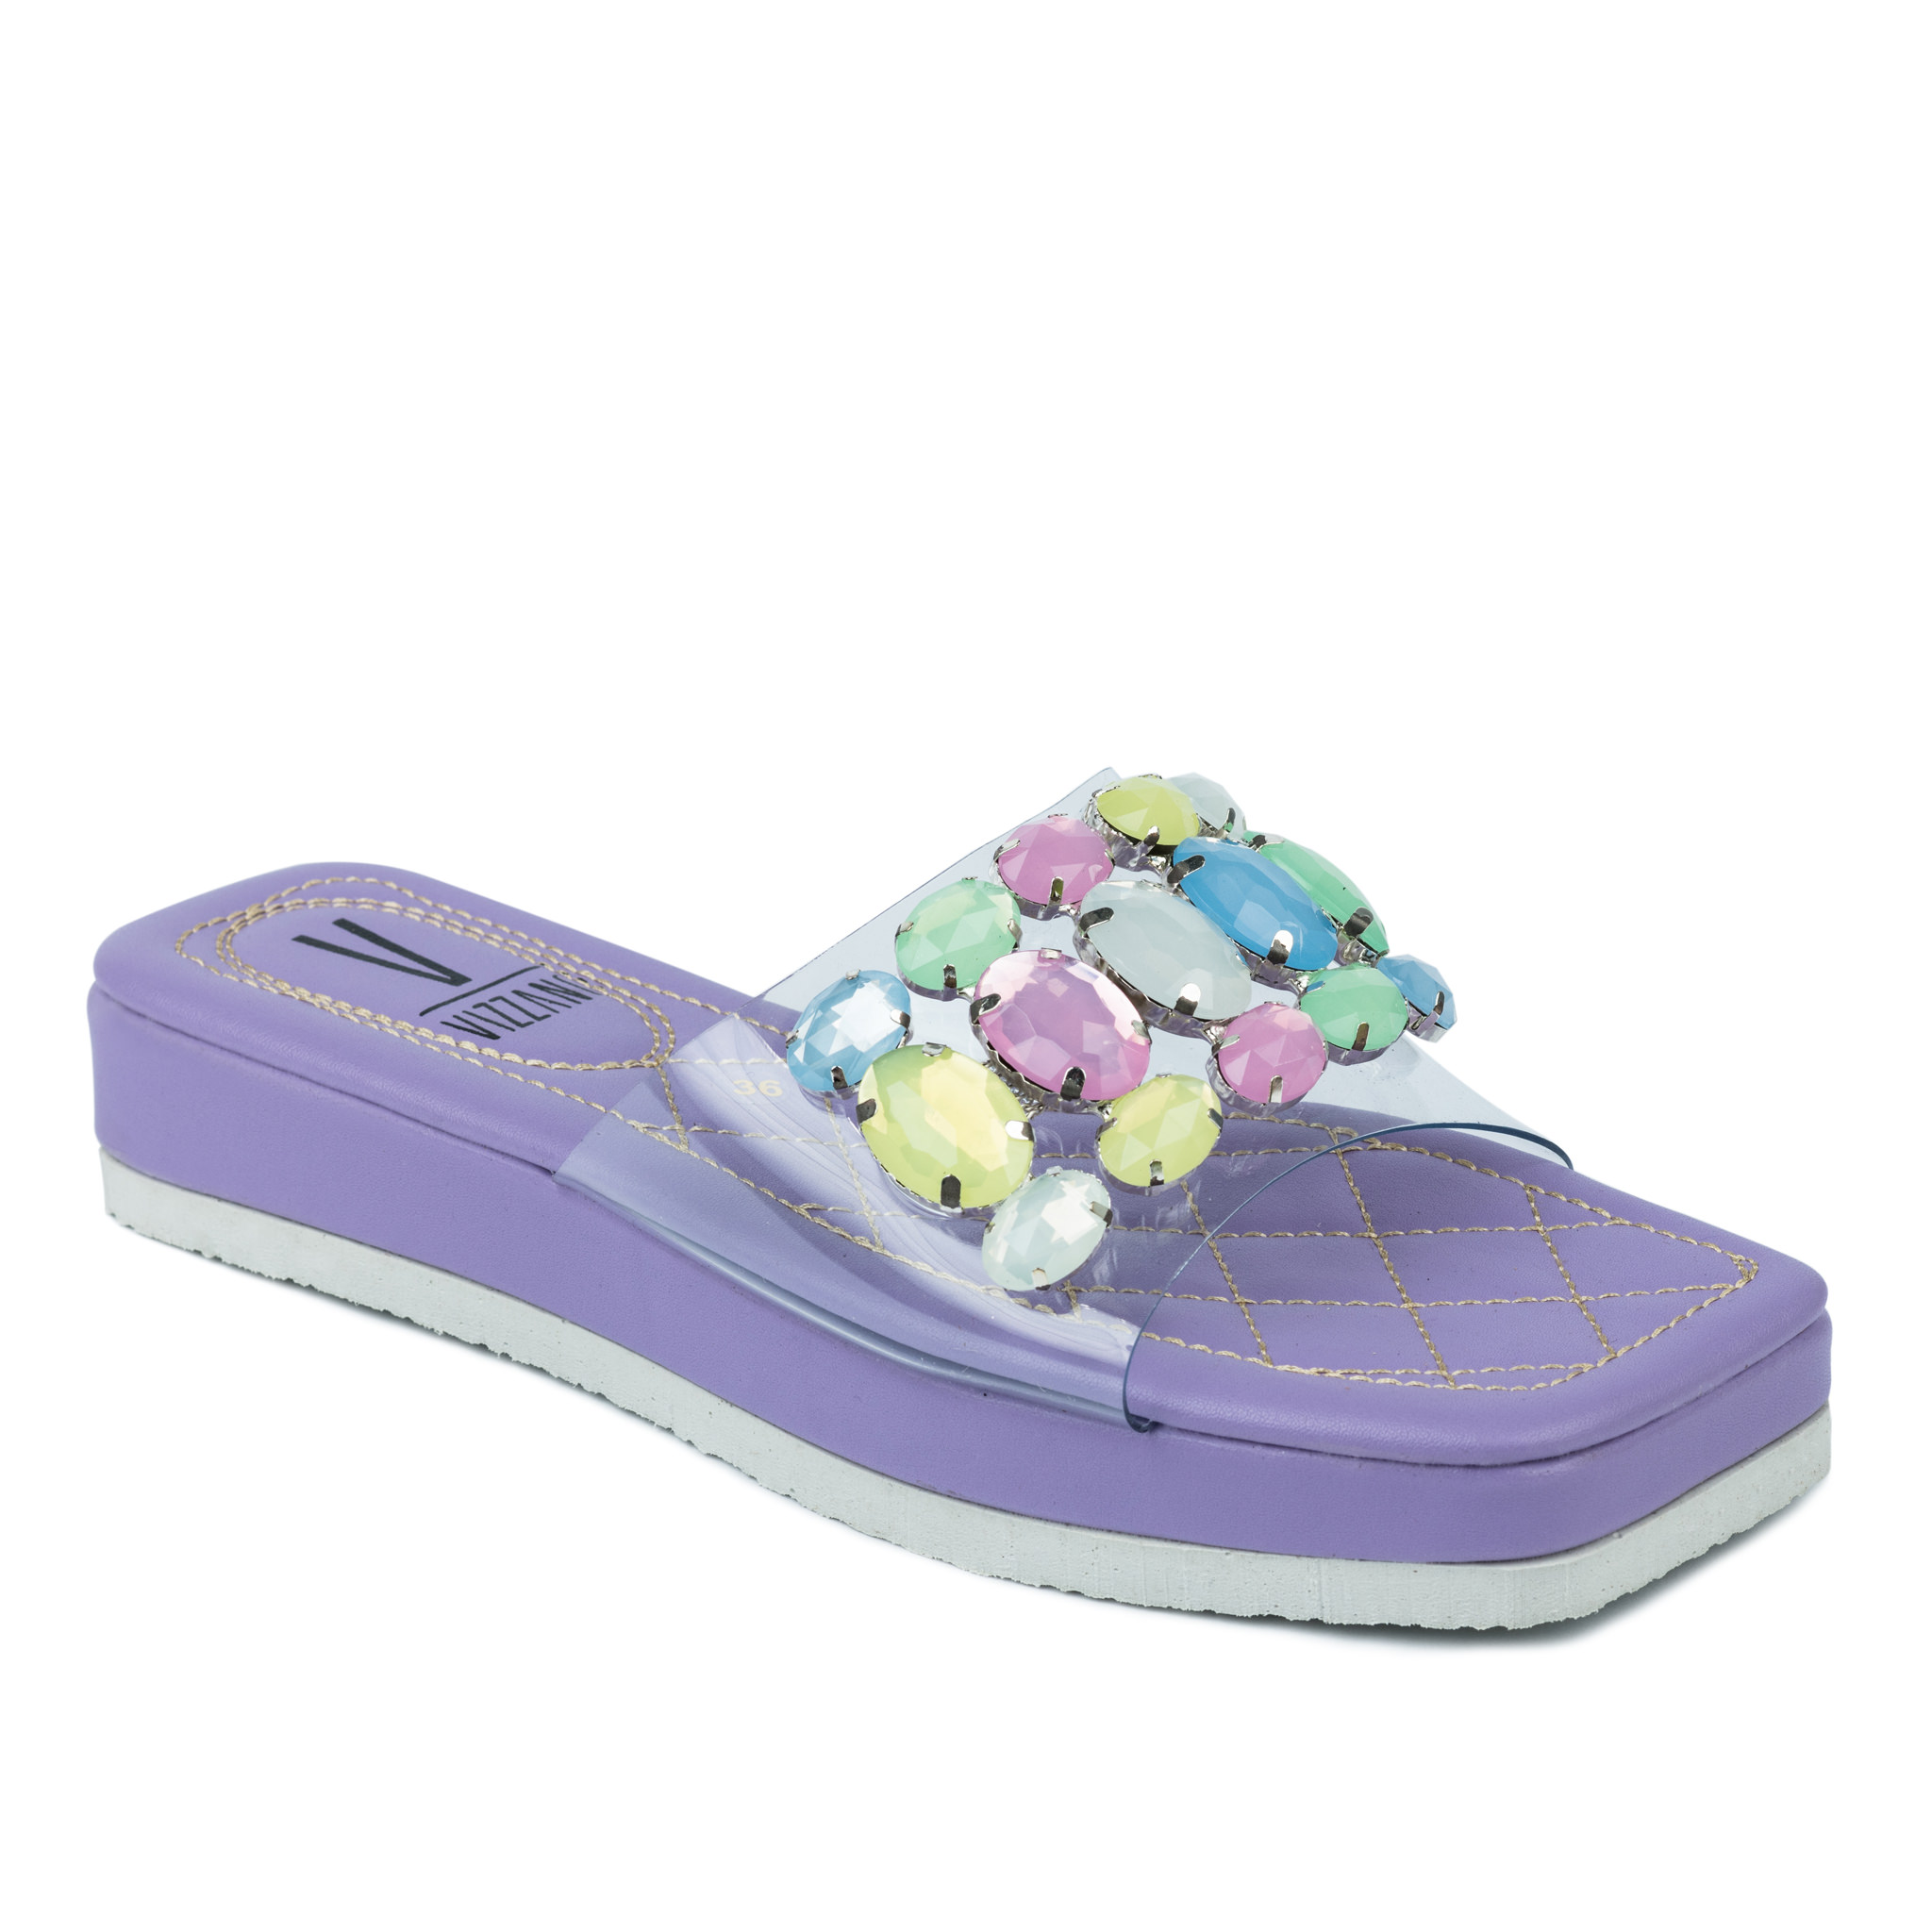 HIGH SOLE MULES WITH ORNAMENTS - PURPLE